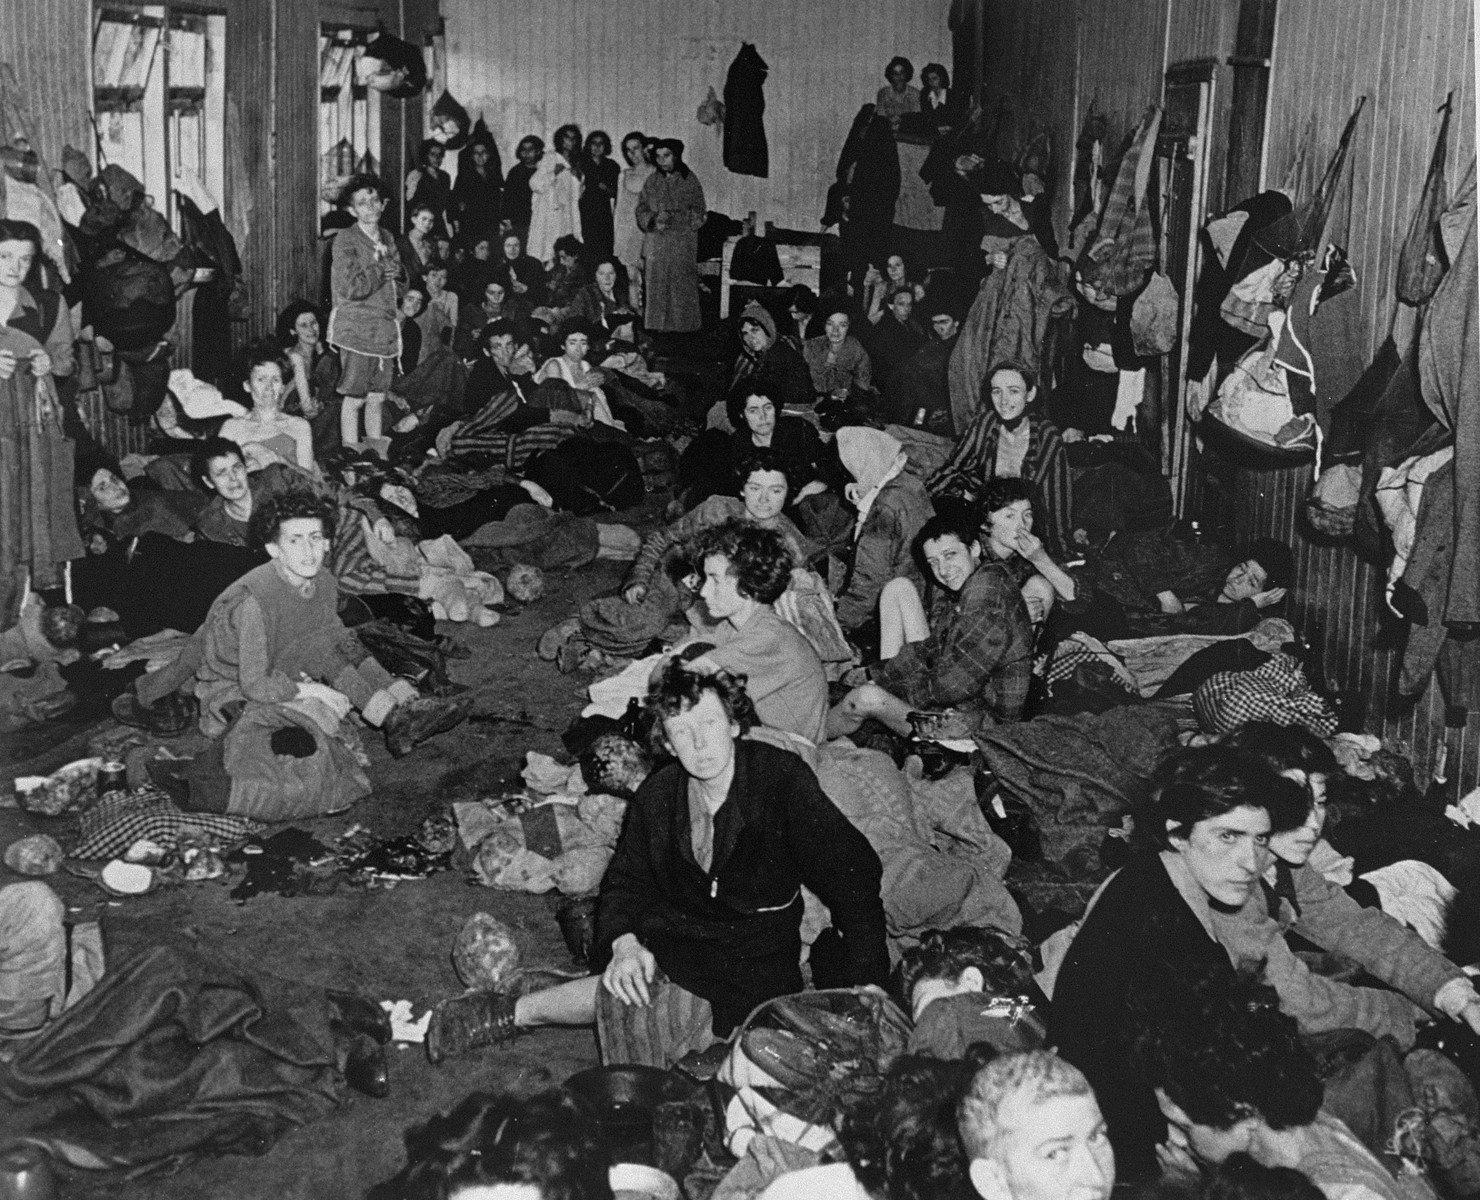 Female survivors in the "Gypsy barracks" after liberation. 

The original caption reads: "A view of the interior of one of the huts."